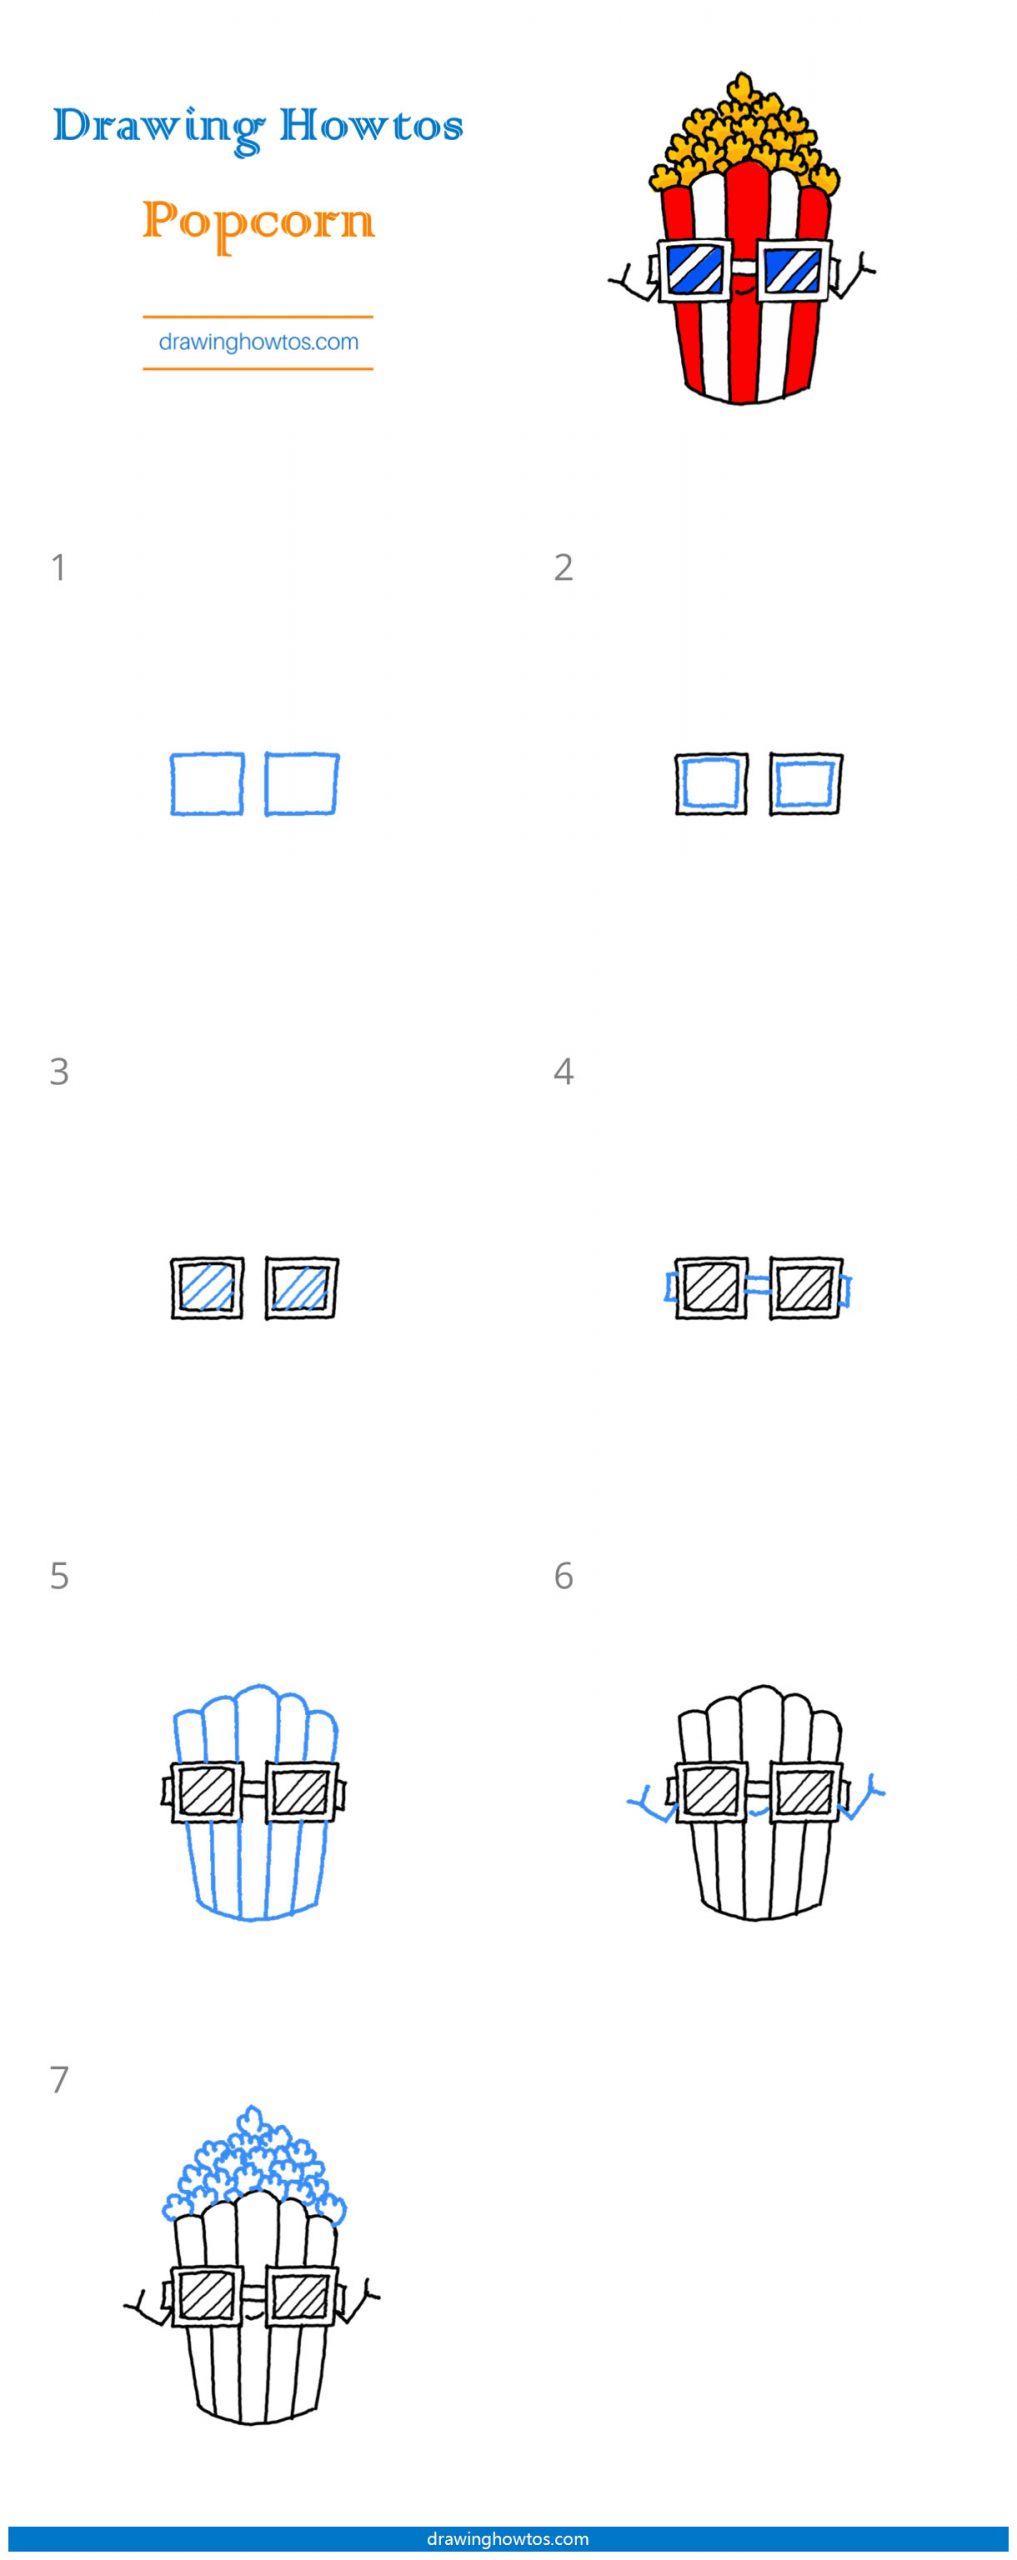 How to Draw Funny Popcorn Step by Step